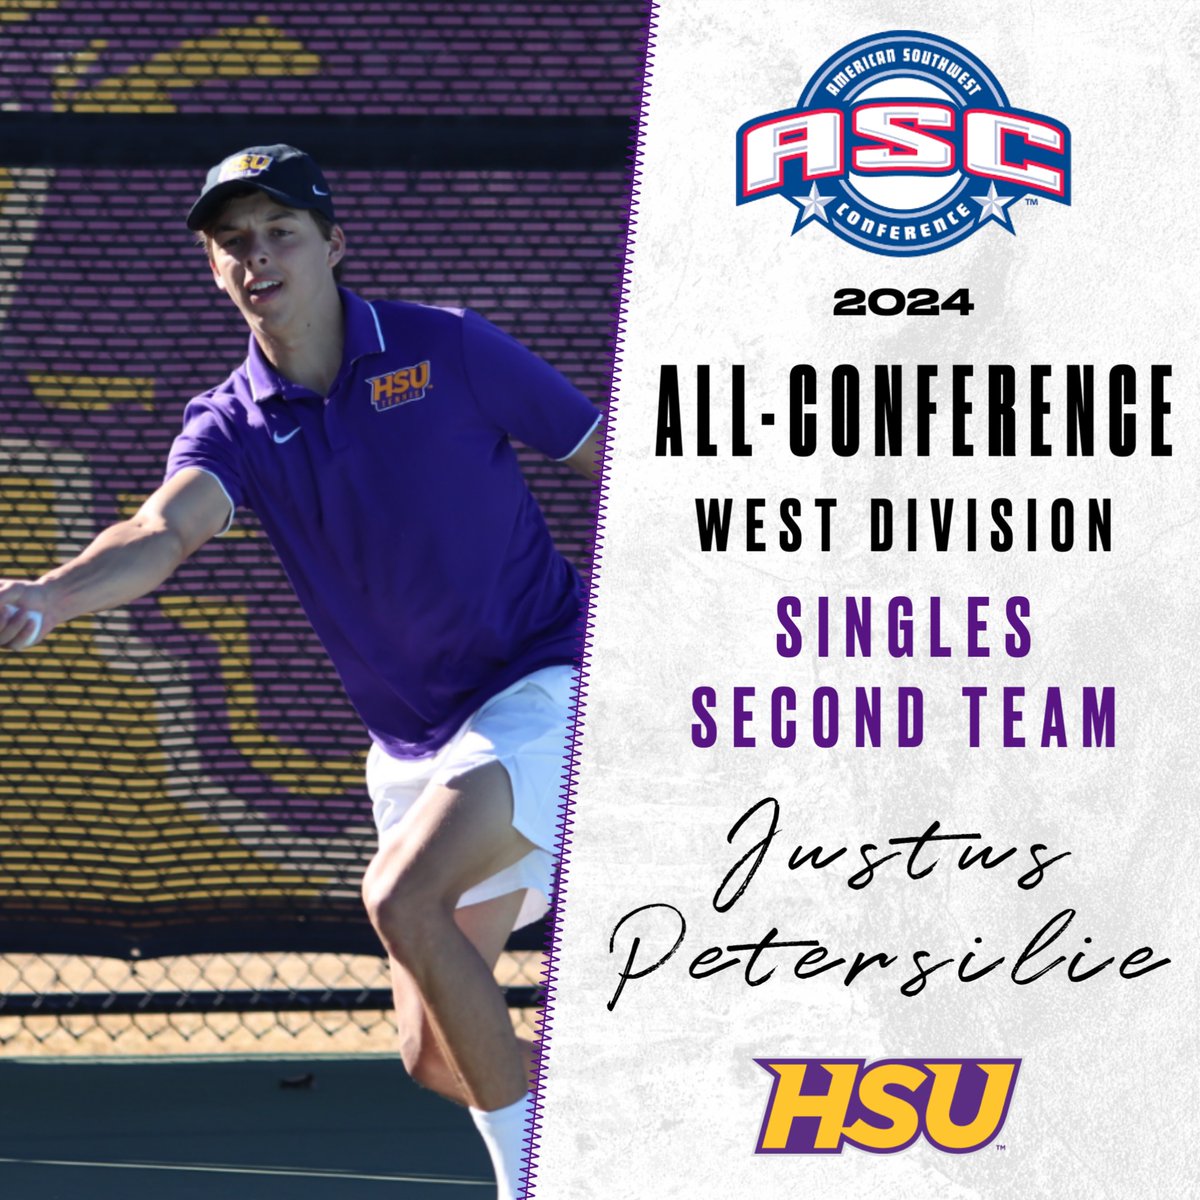 Congrats to Justus Petersilie for being named to the ASC West Singles Second Team! 🤠